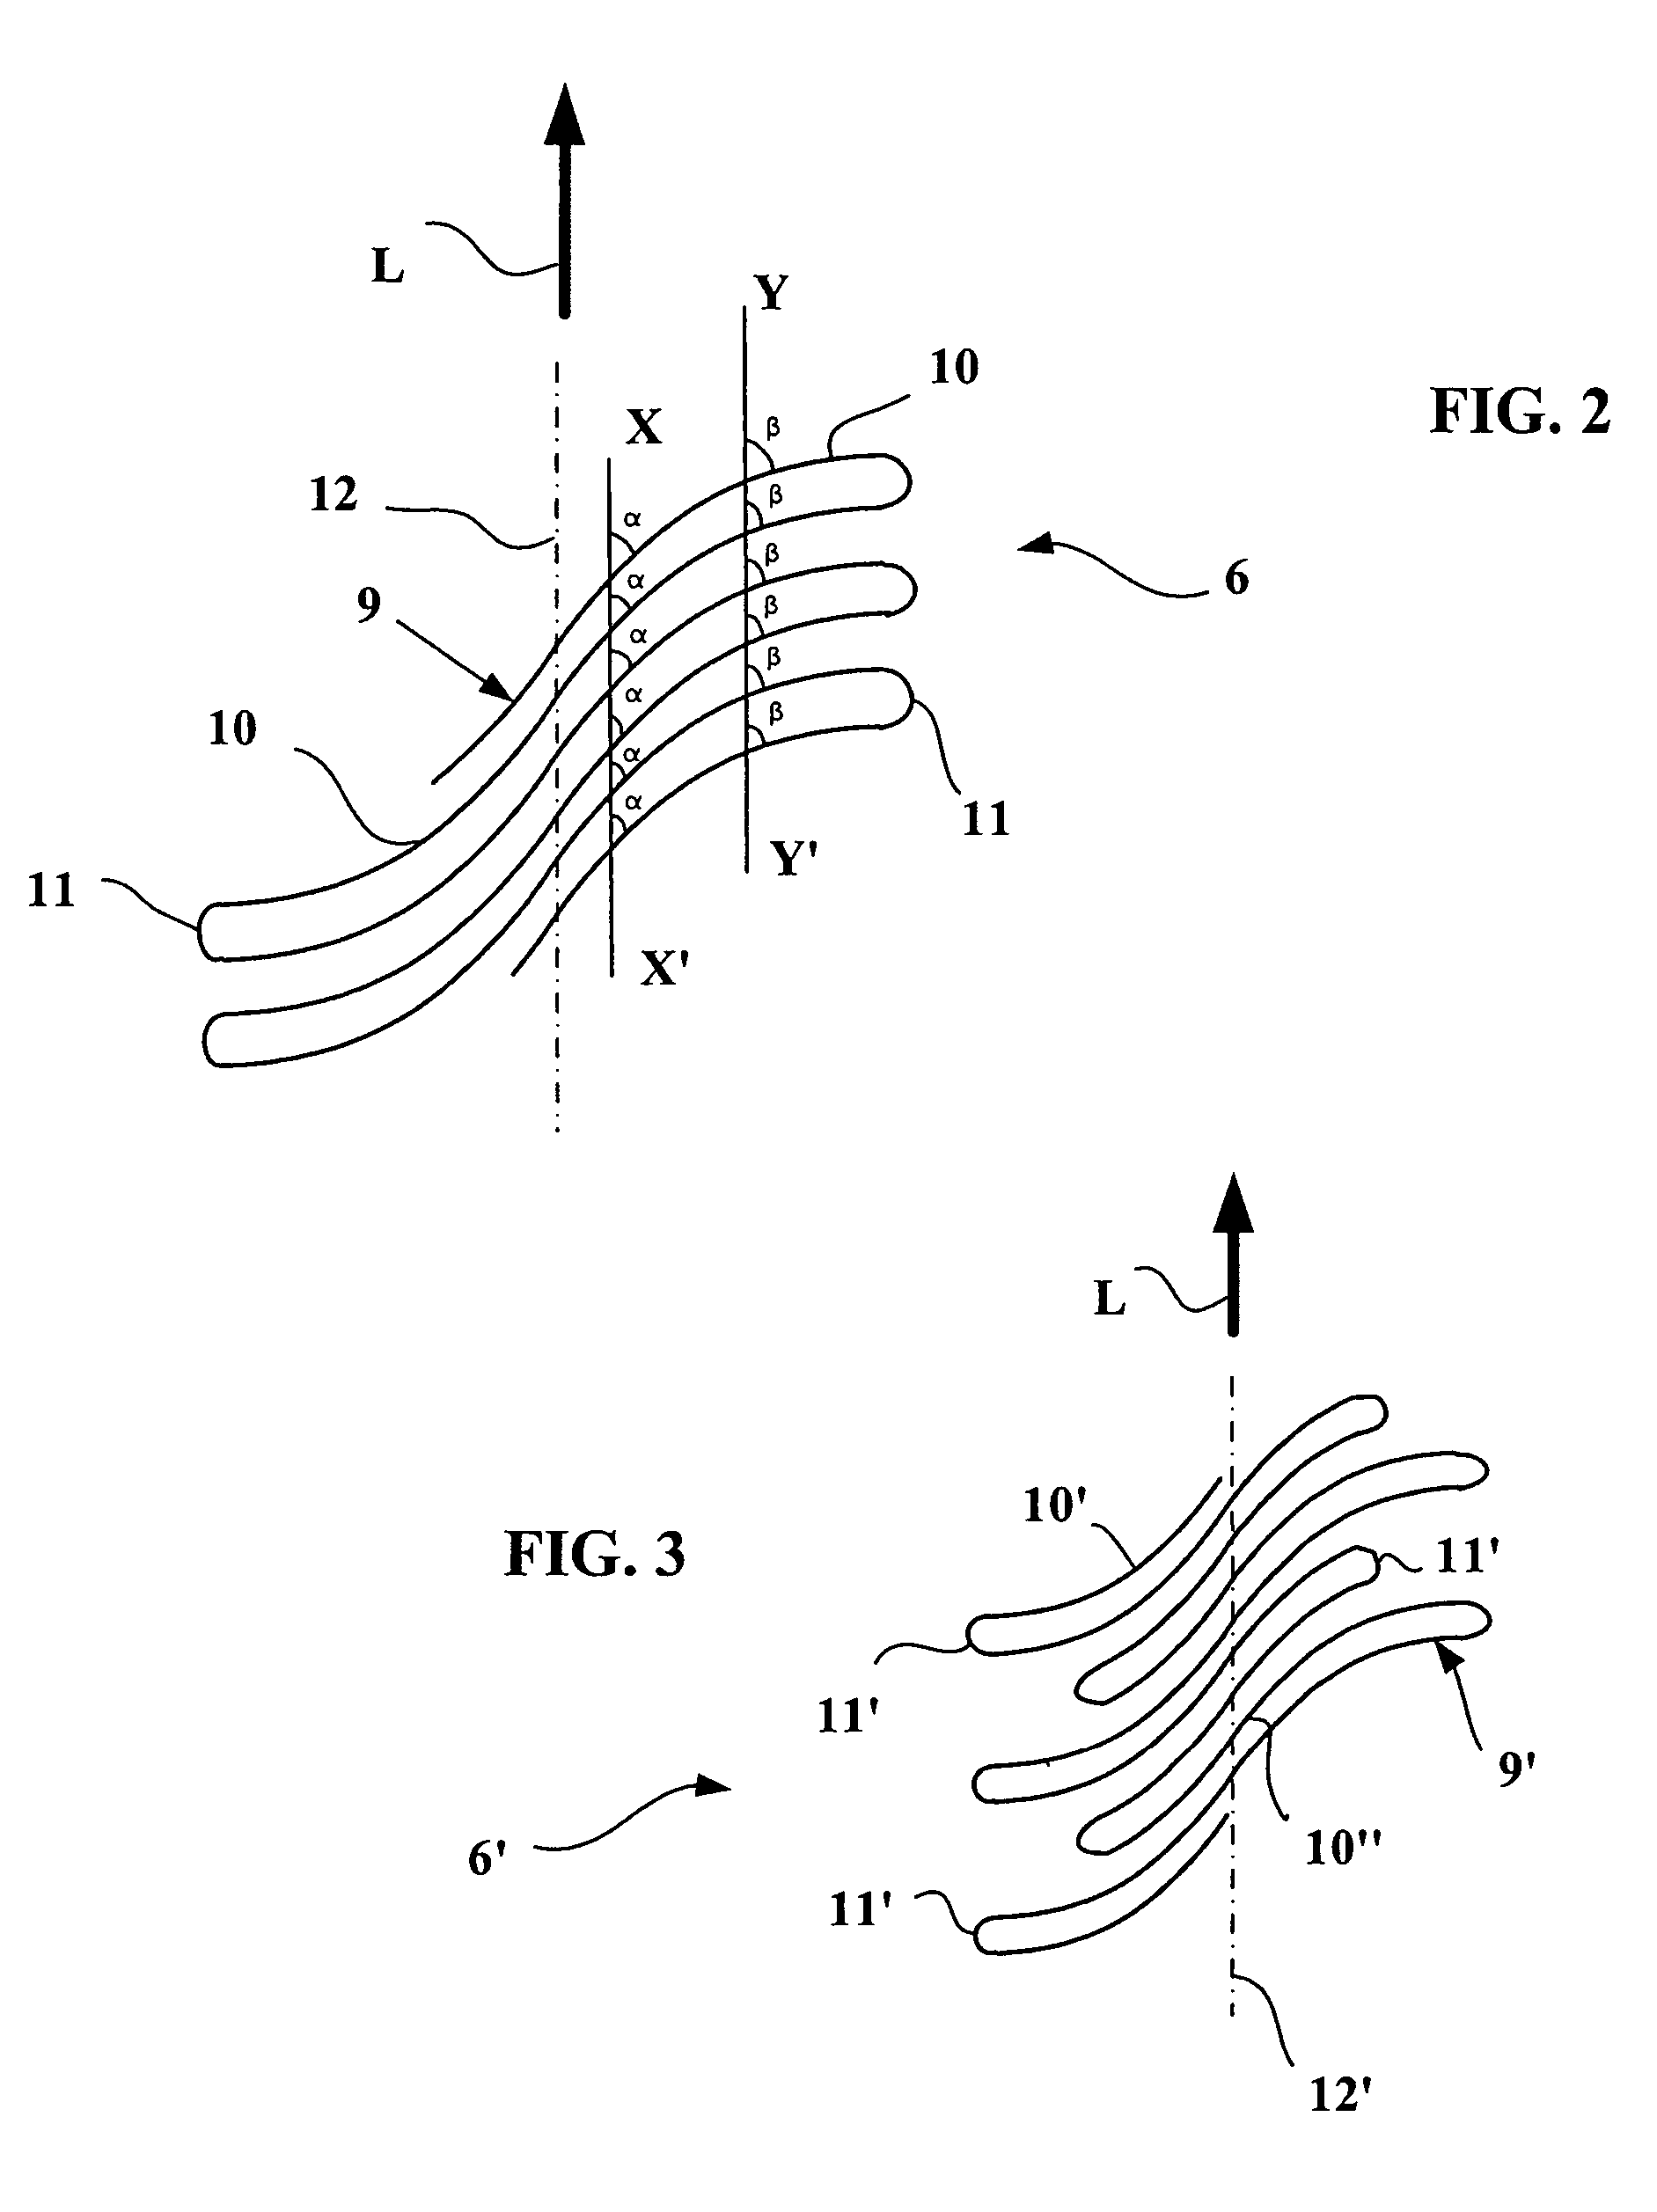 Tire for two-wheeled vehicle comprising looped crown reinforcement